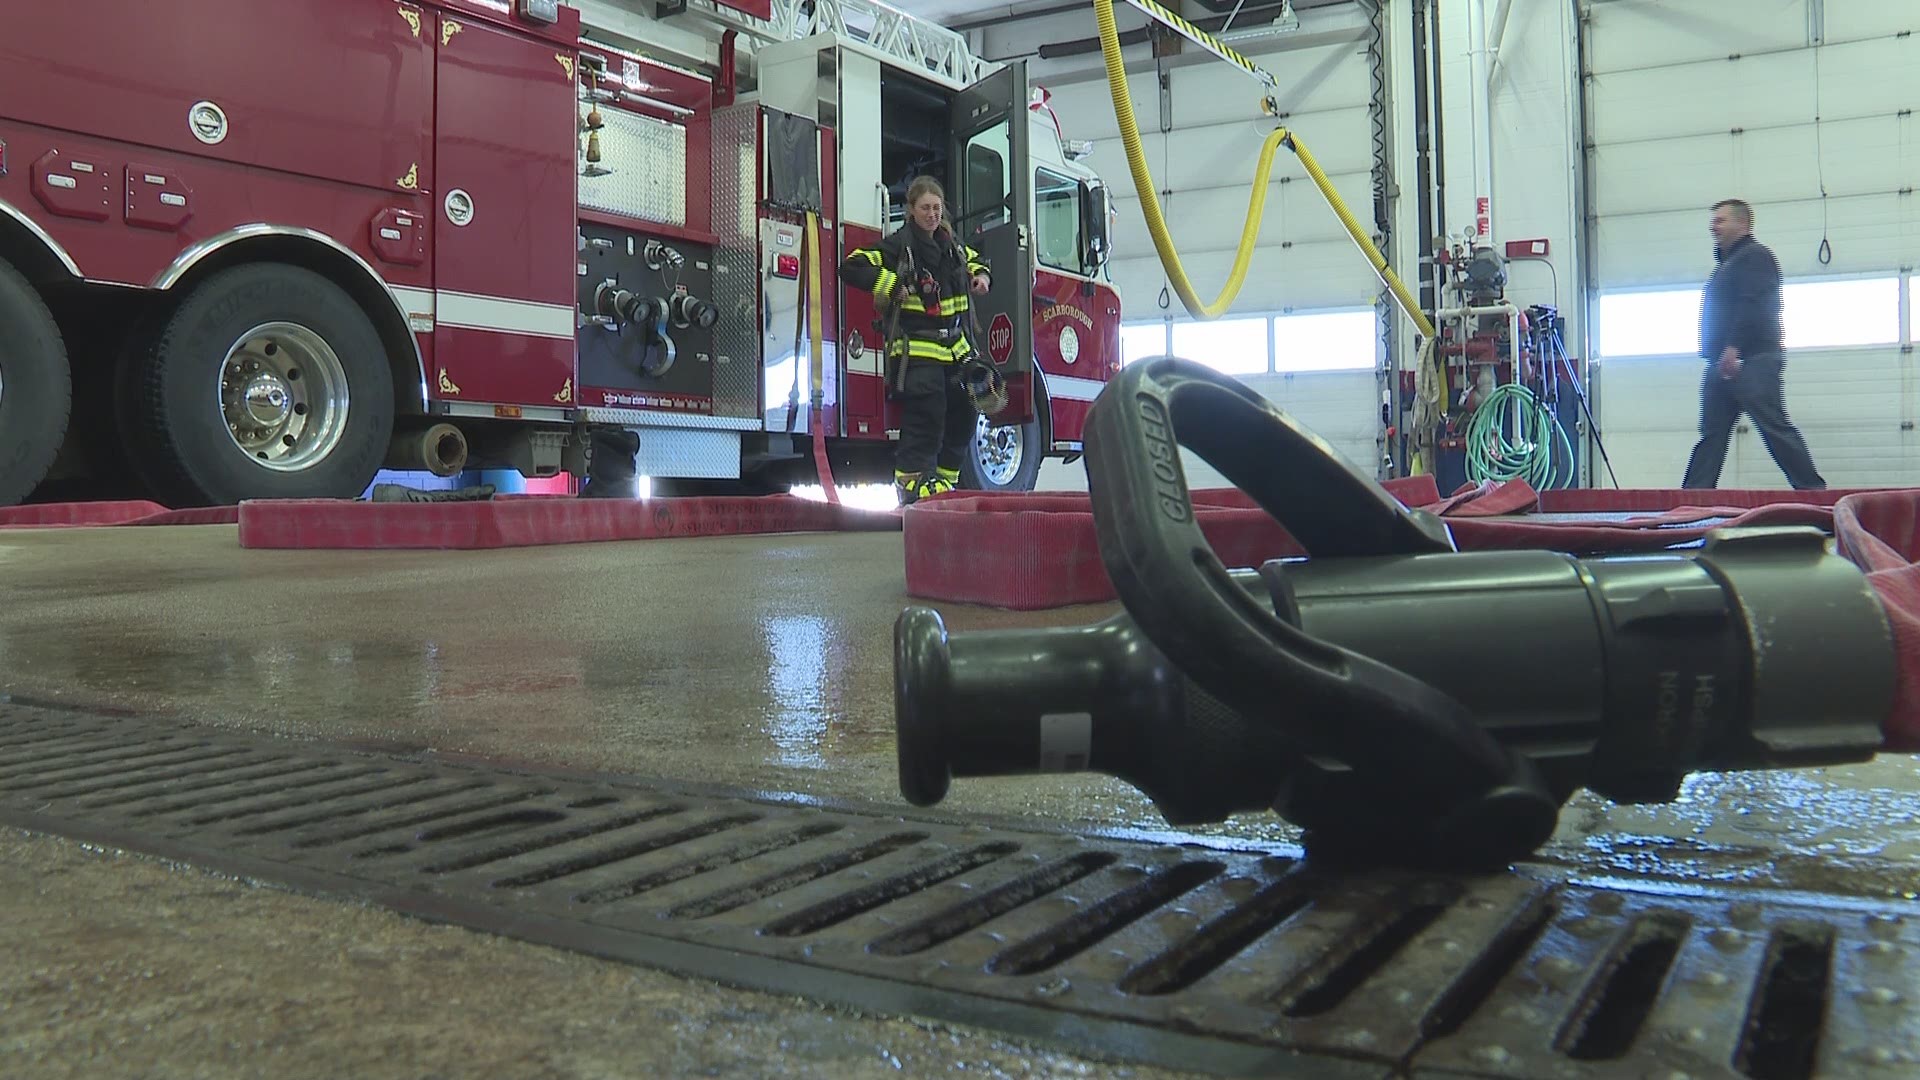 Southern Maine Community College has been training fire fighters since 1969. It boasts the largest live in program in the country, placing students within local fire department.